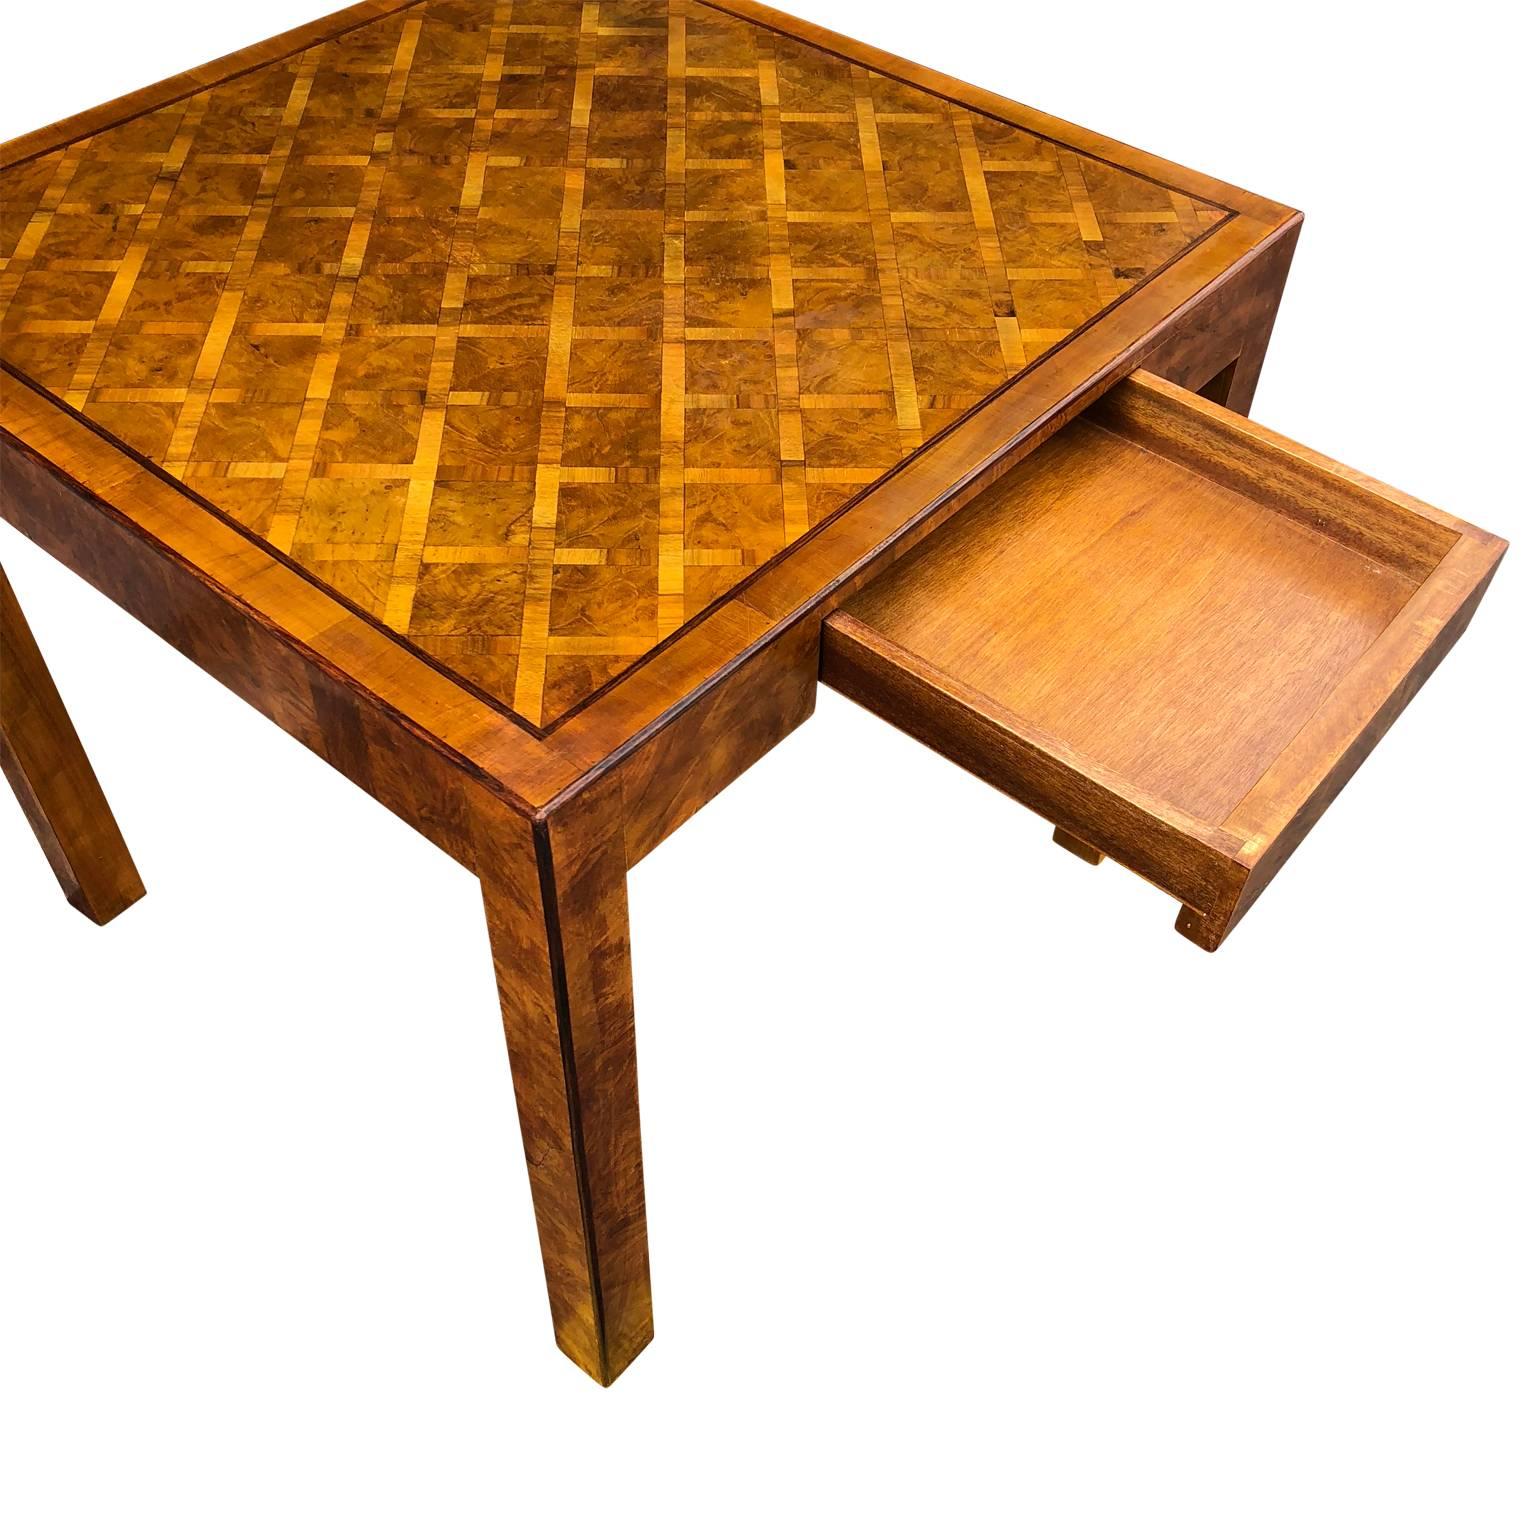 Two-Drawer Square Italian Parquet Game Table, Italy 1960s

$125 flat rate front door delivery includes Washington DC metro, Baltimore and Philadelphia